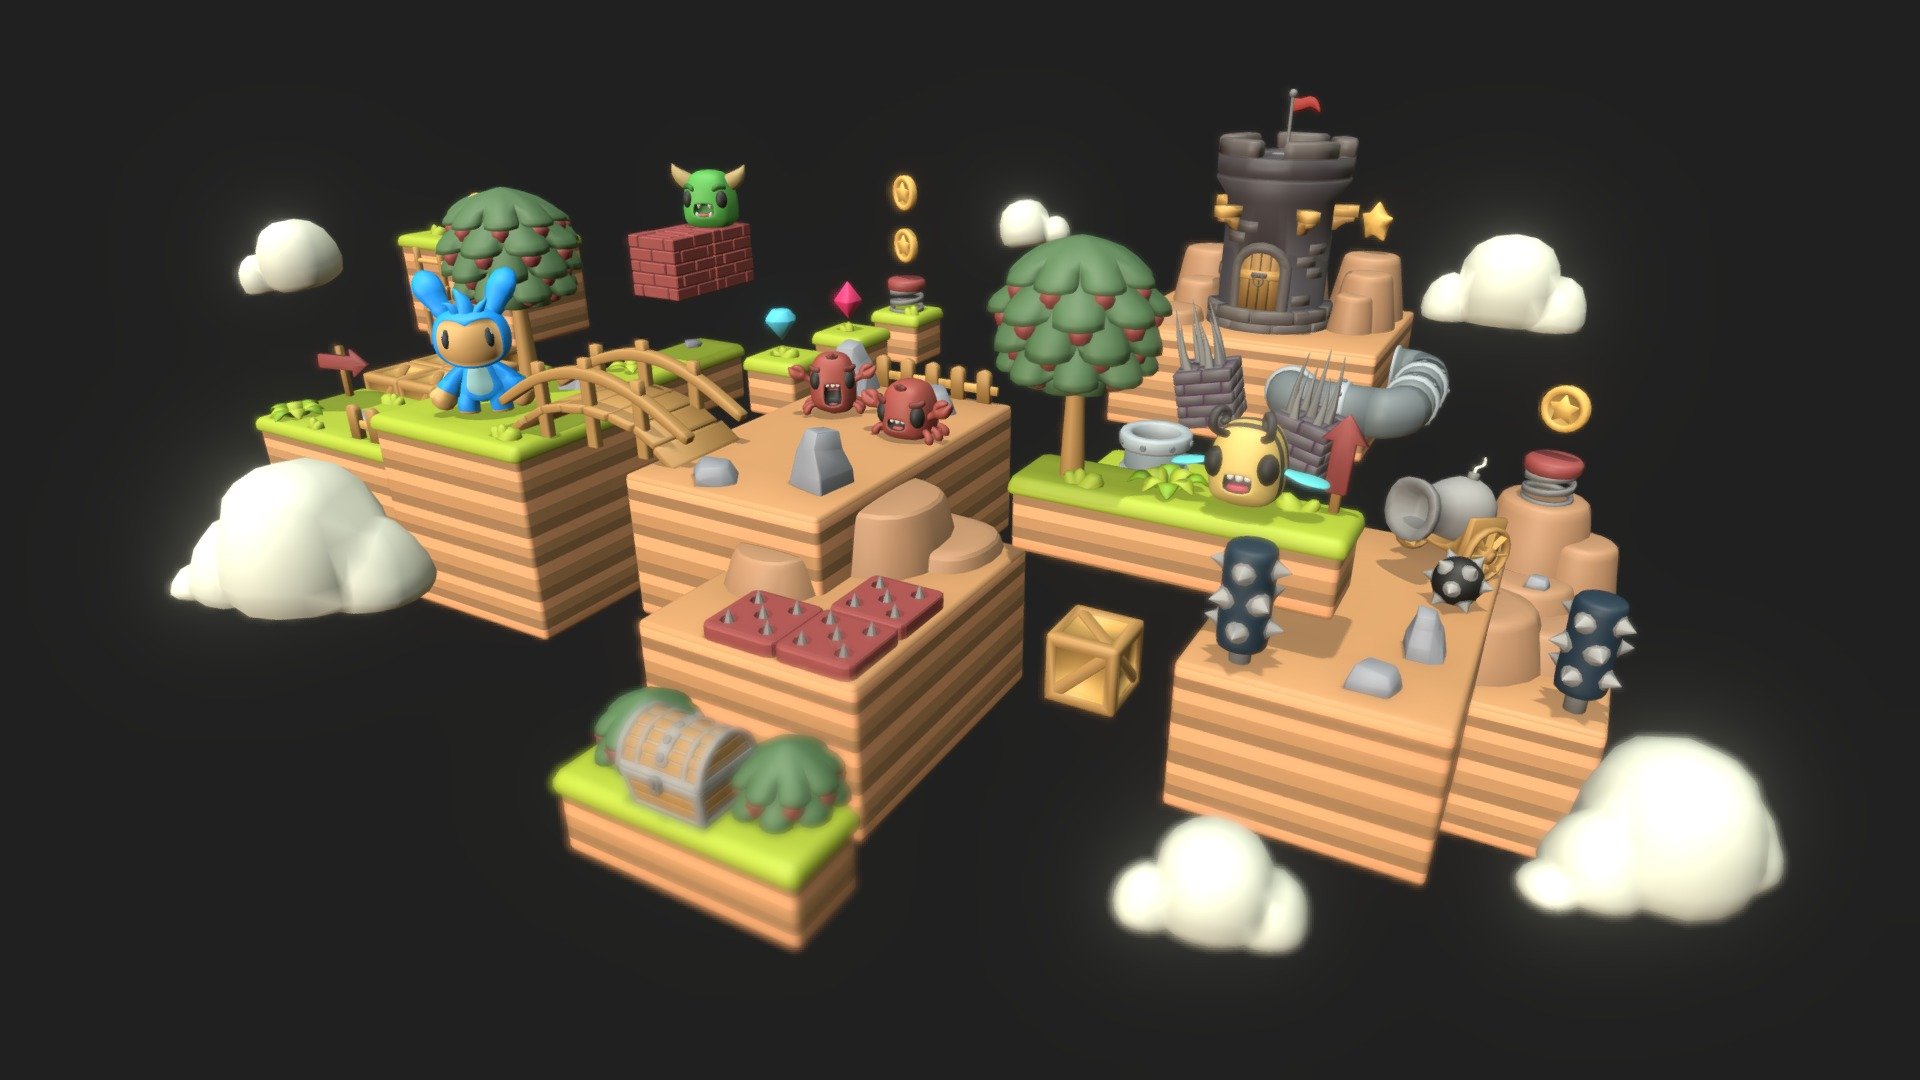 100+ Models in FBX, OBJ , Blend and glTF!

A huge pack with everything you need to make a platformer, character with 18 animations, animated enemies, platforms, mechanics, and much more! 

Free to use in any project, even commercially! (CC0)

You can download the complete pack for free on my website:
https://quaternius.com - Ultimate Platformer Pack (100+ Models) - Download Free 3D model by quaternius 3d model